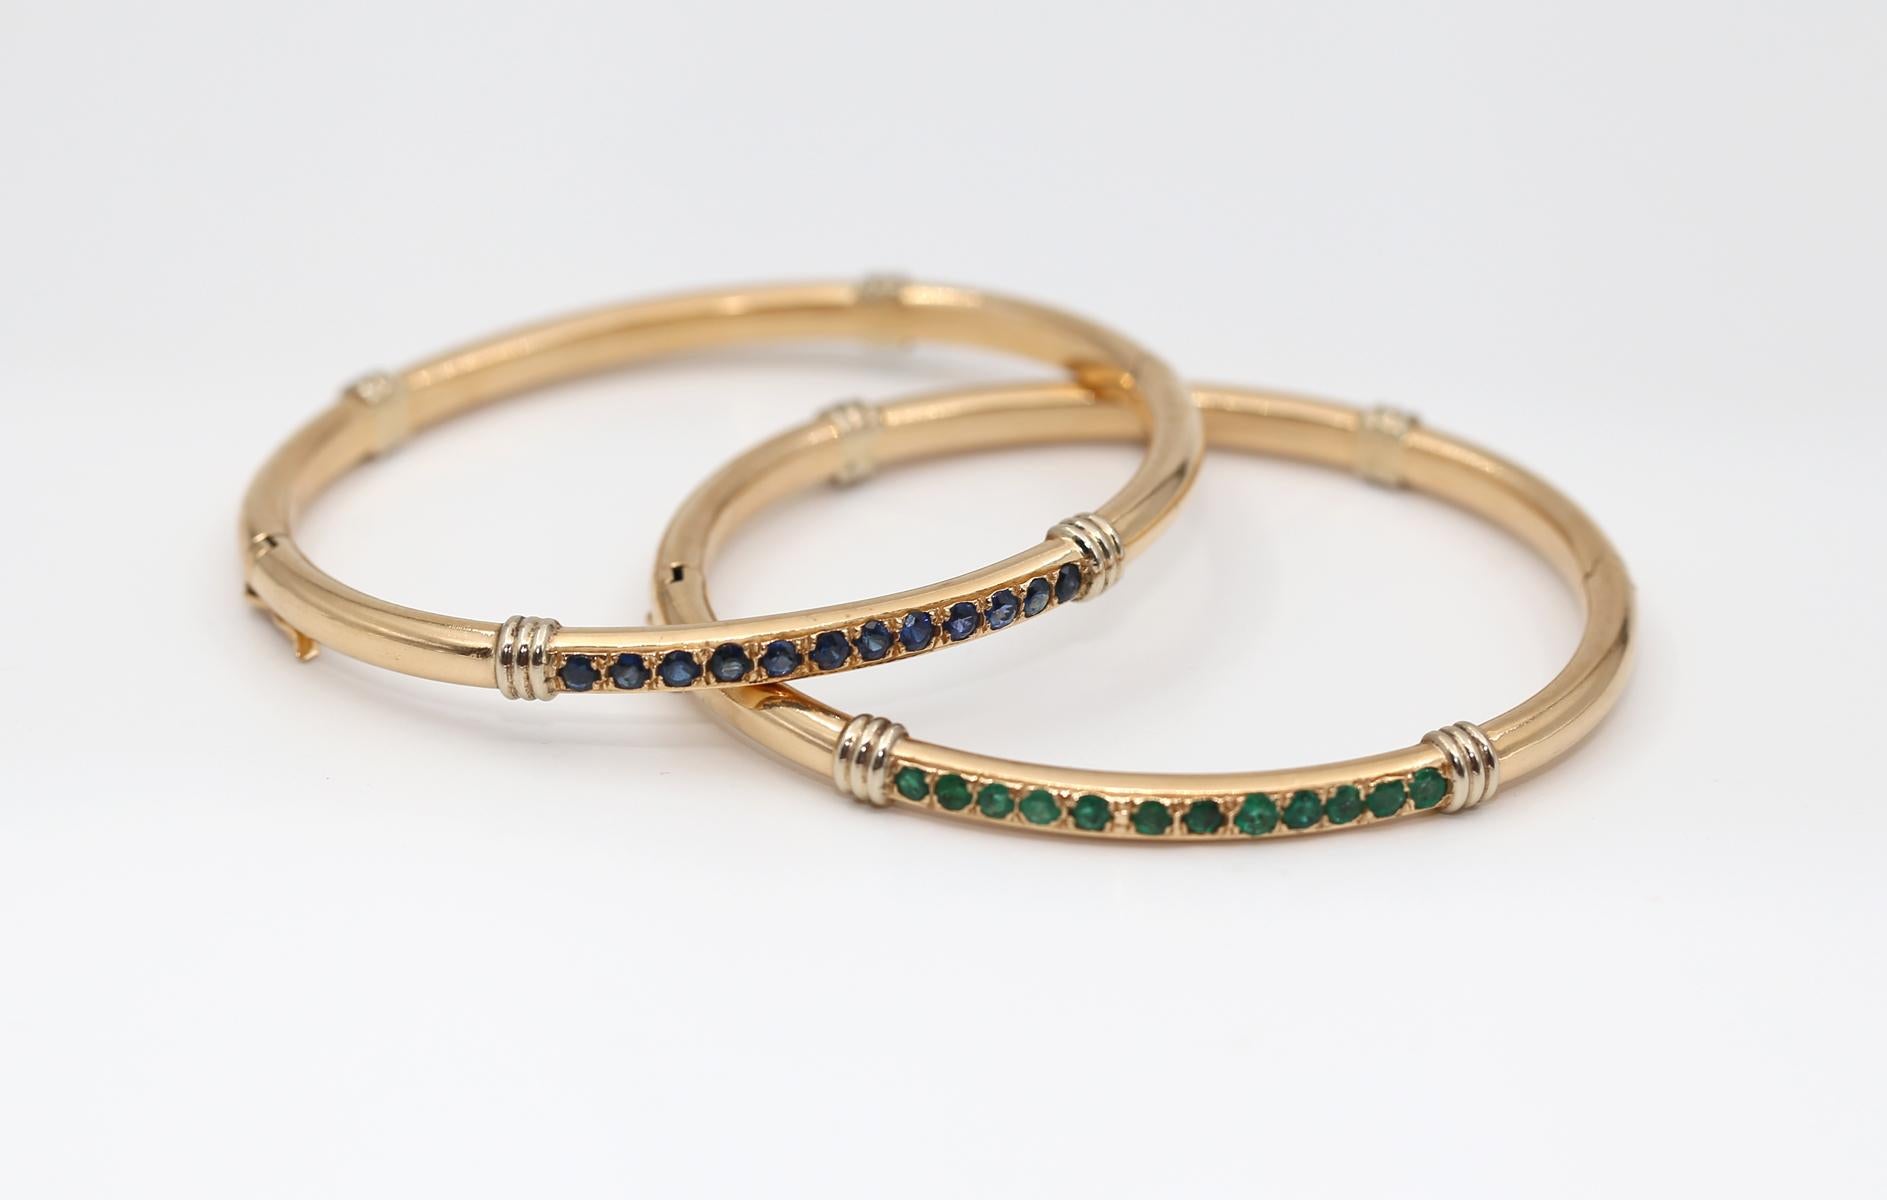 Each bracelet is set with a row of 12 round-cut Emerald and Sapphire stones respectively.
Each bracelet has a fine heavy weight to it and they bling nicely when worn together on one hand. The pair is a fashion statement and a great addition to a